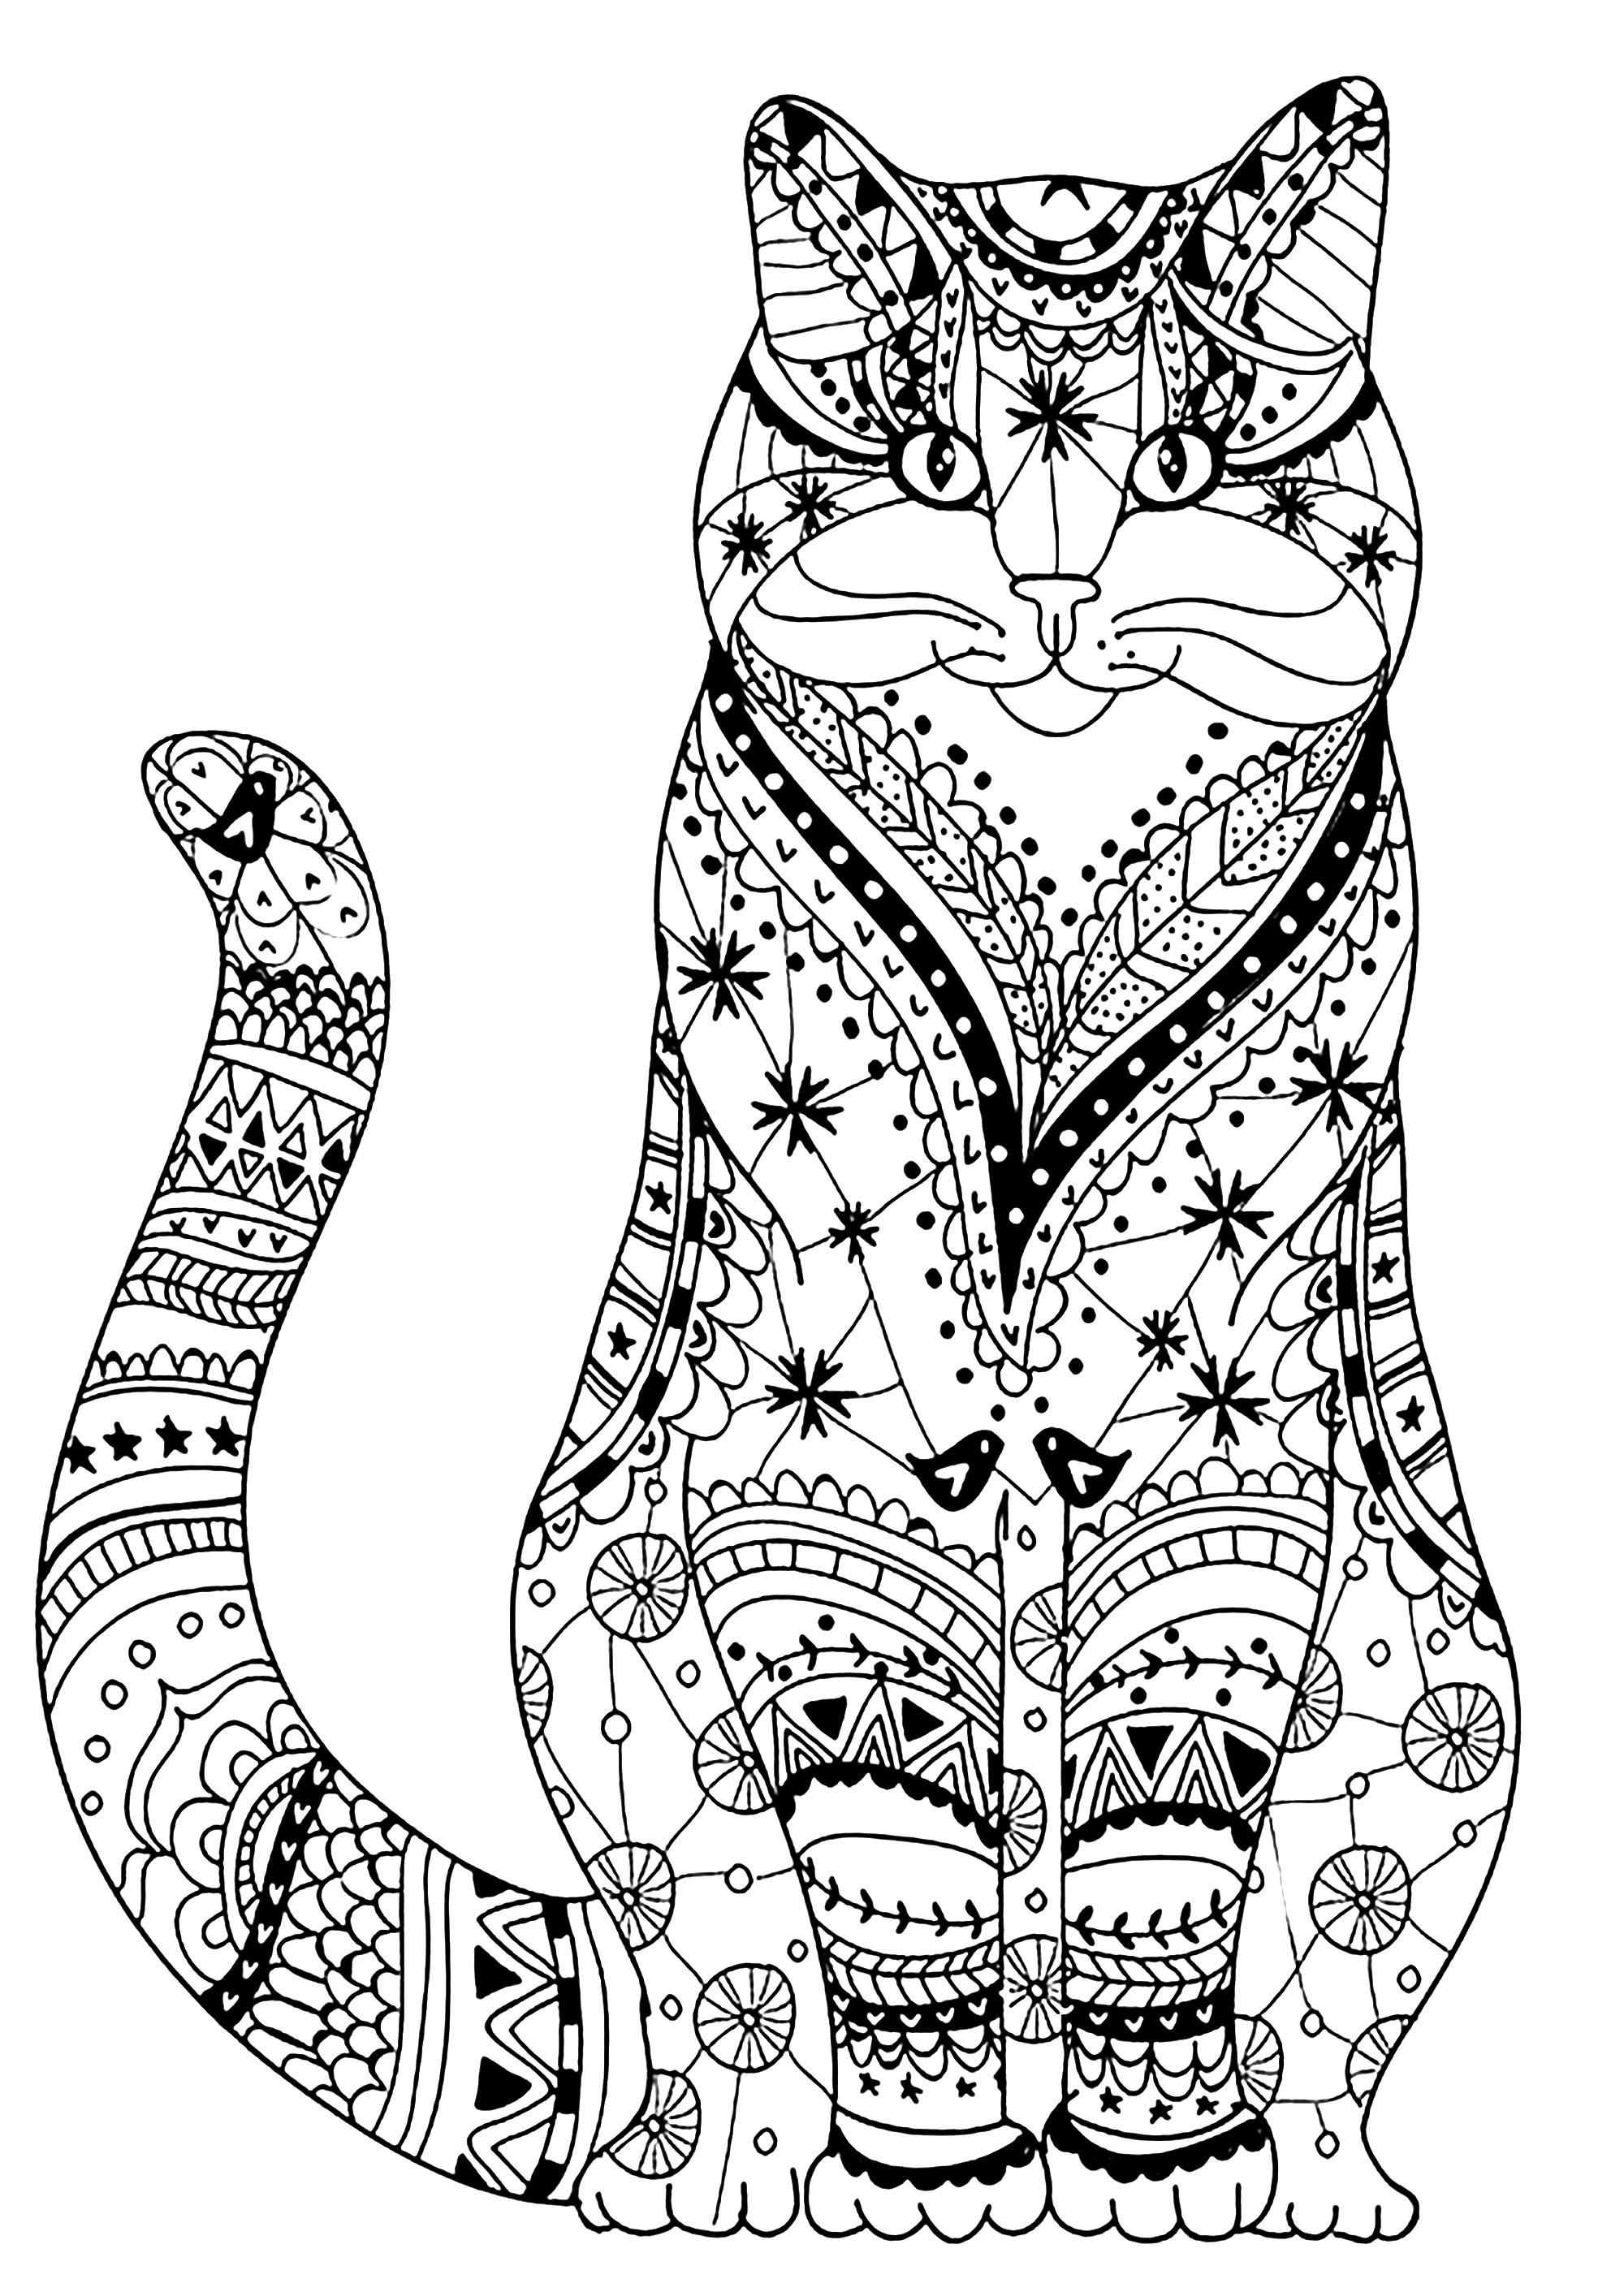 Free Printable Cat Coloring Pages For Adults - Free printable cat